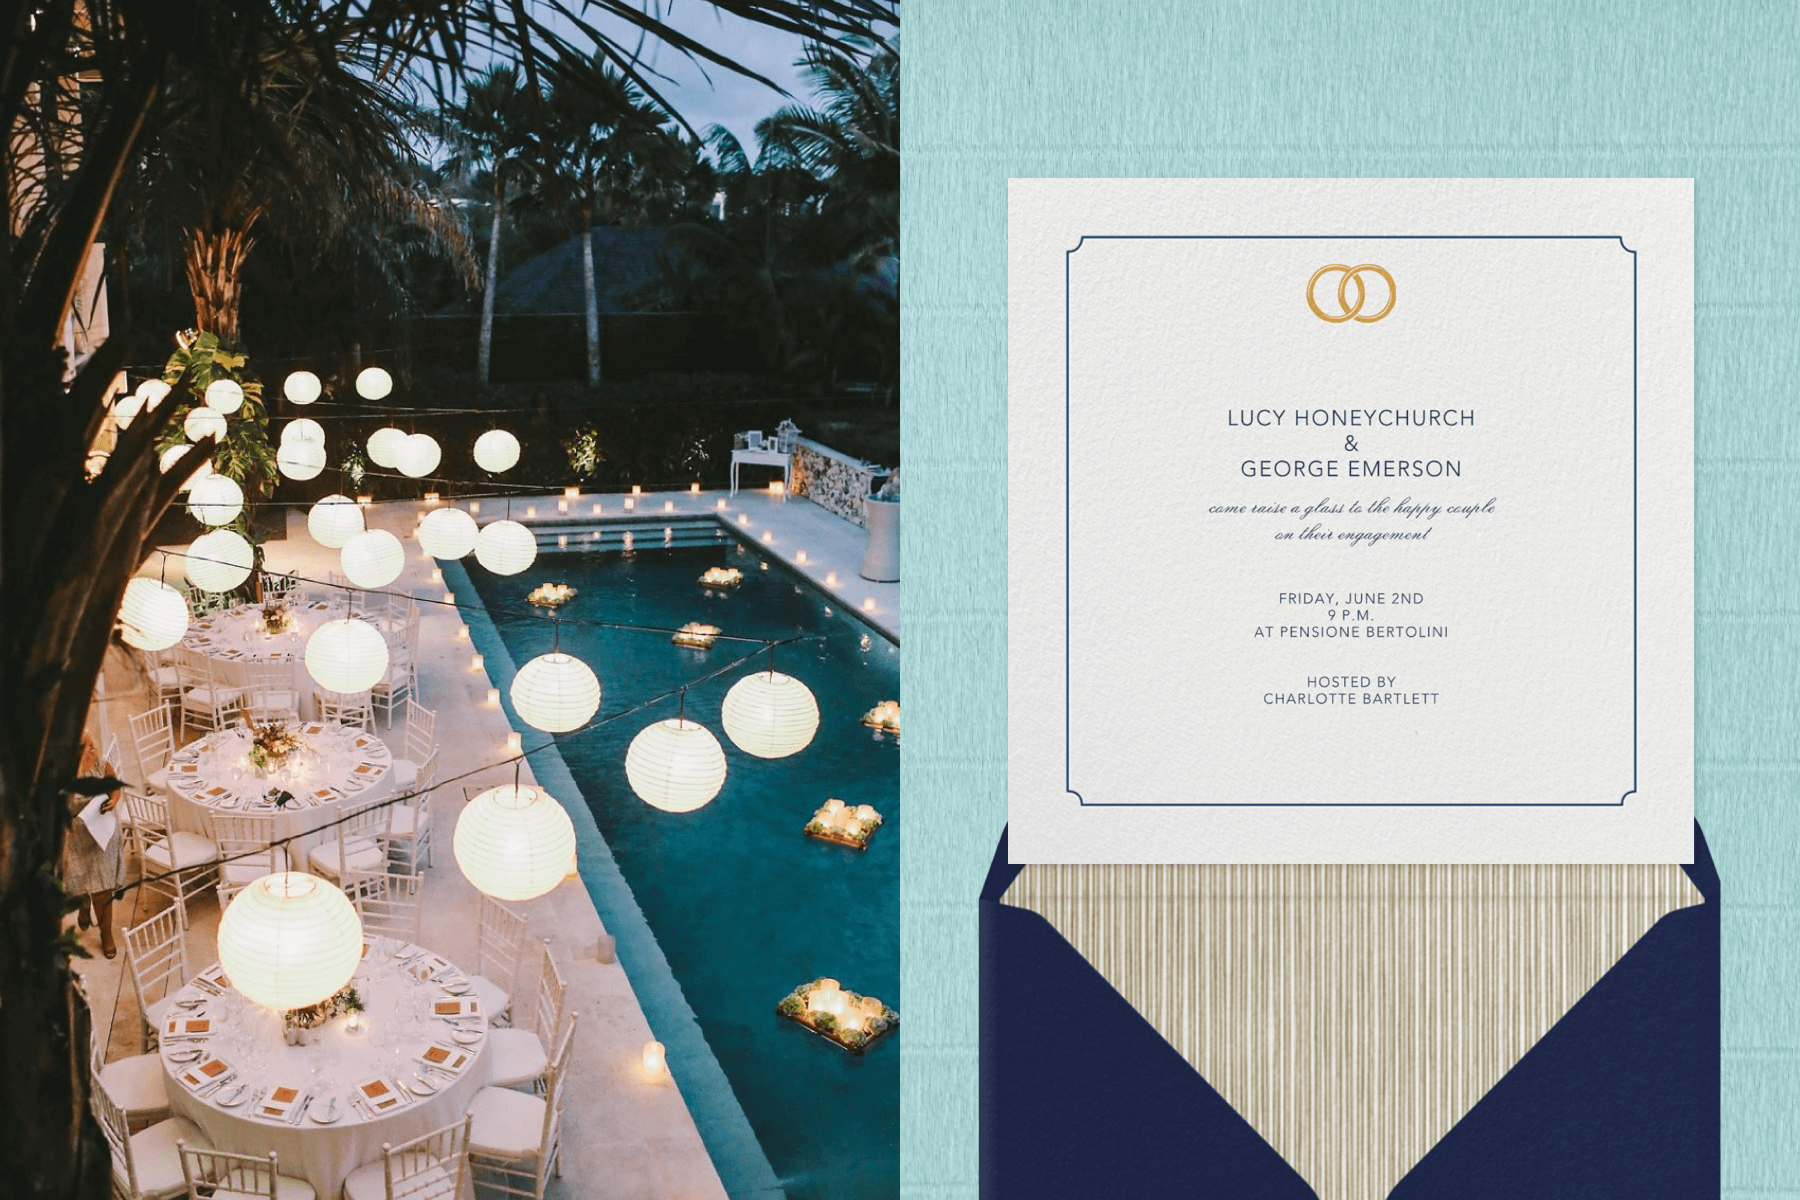 An aerial view of three round tables set next to a swimming pool in the evening with round paper lanterns hanging overhead. Right: A square engagement party invitation with a thin navy blue border and indented corners with two interlocked gold rings at the top.